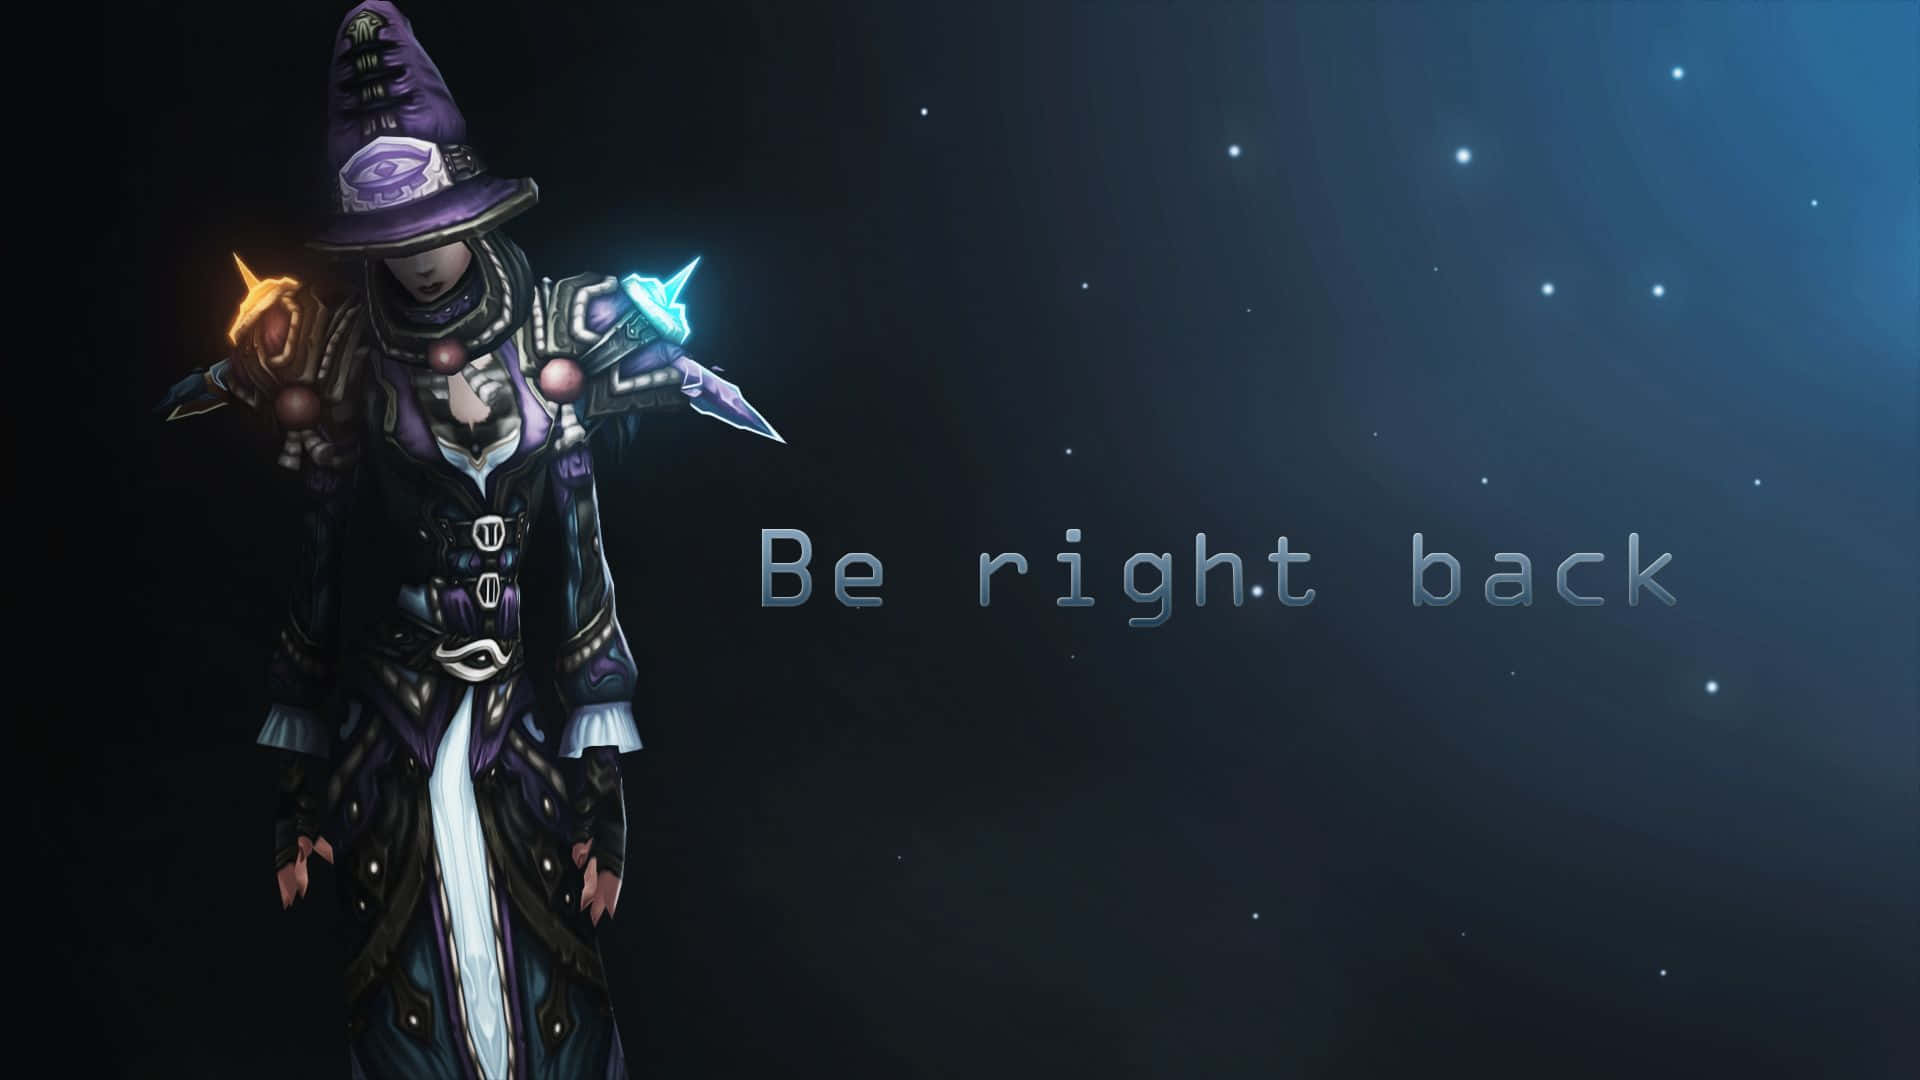 Take A Break And Be Right Back Wallpaper